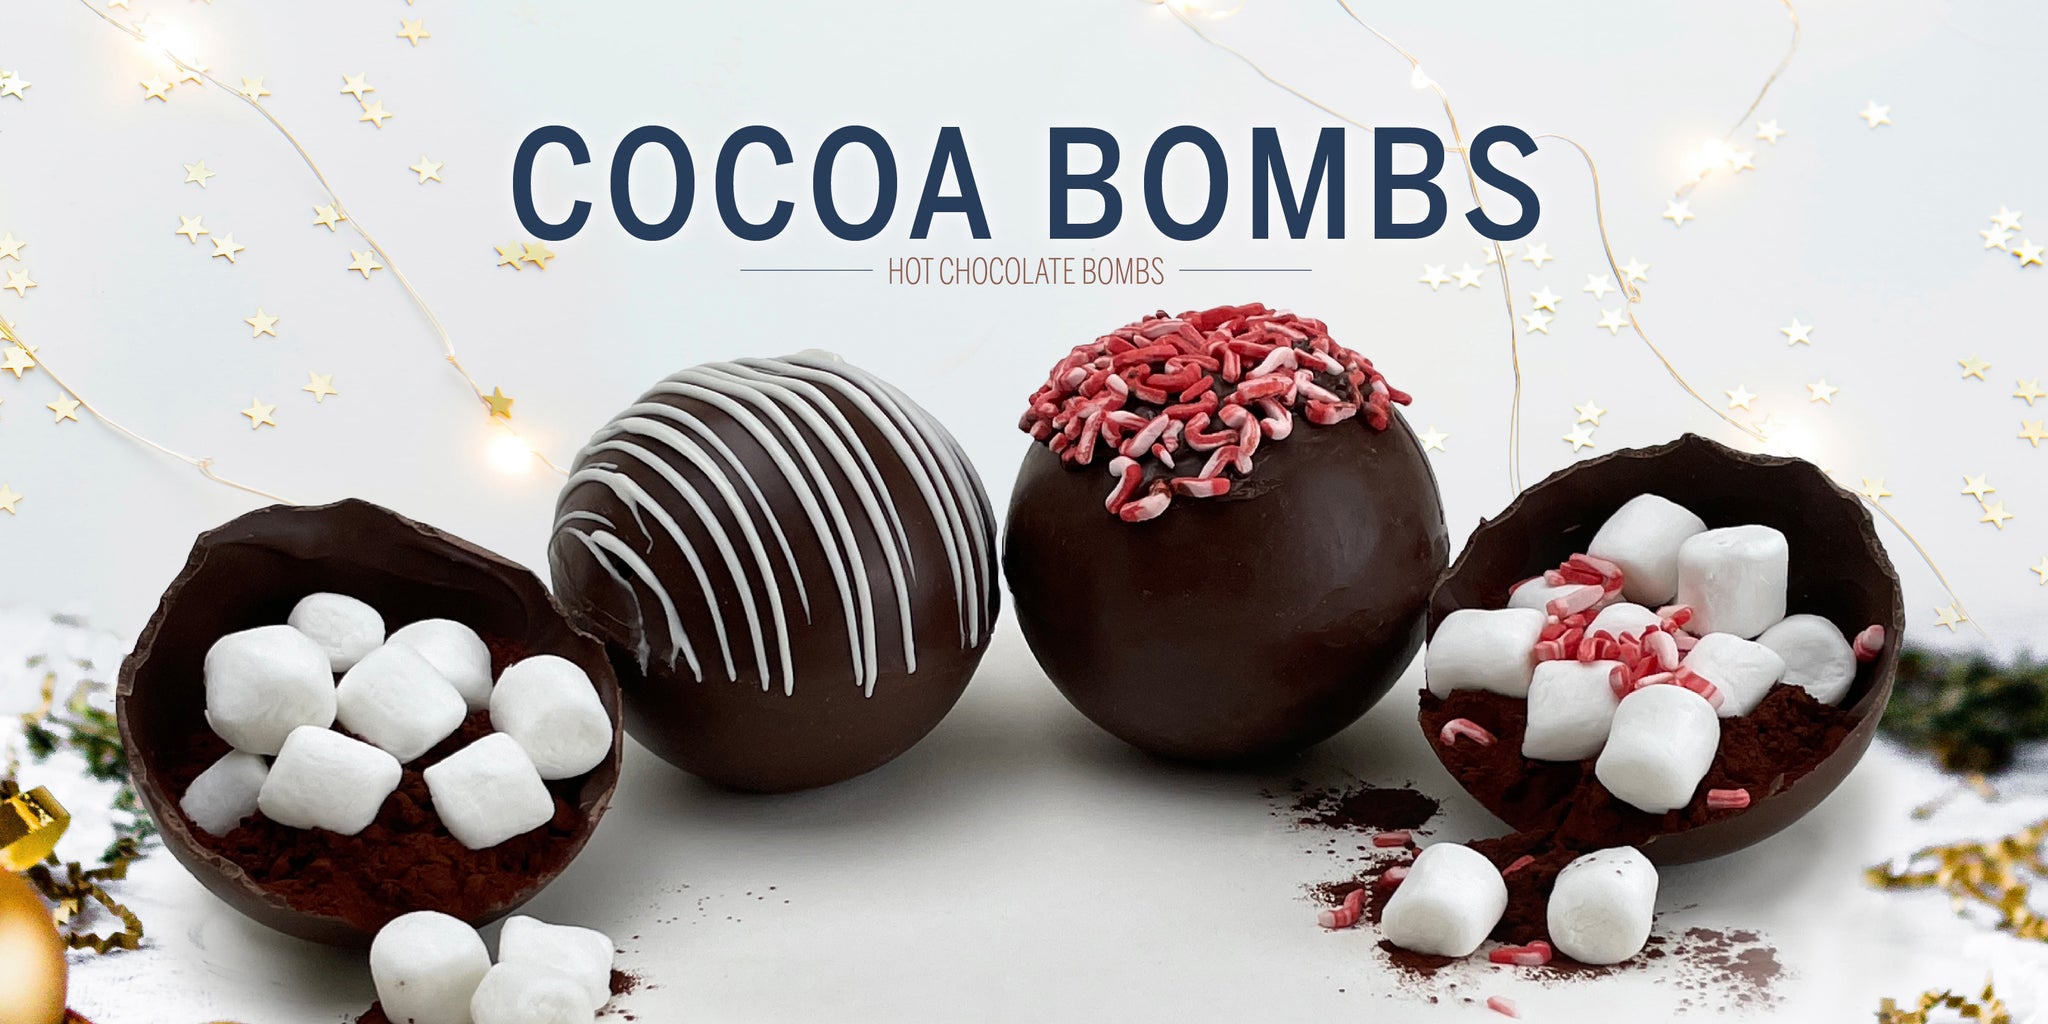 Image of Hot Chocolate Cocoa Bombs